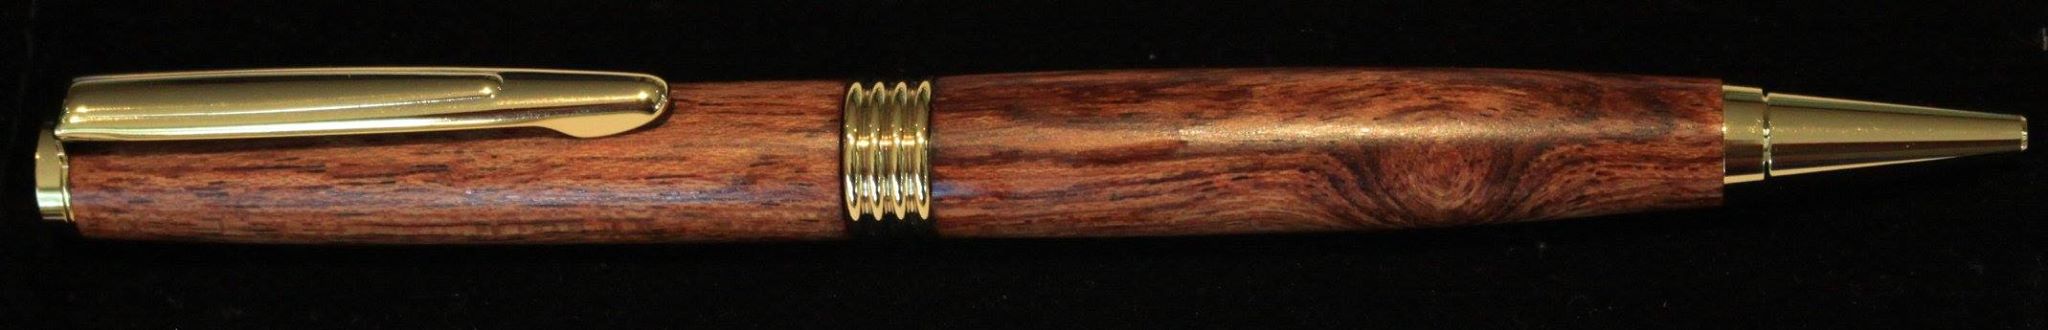 First Pen - African Rosewood